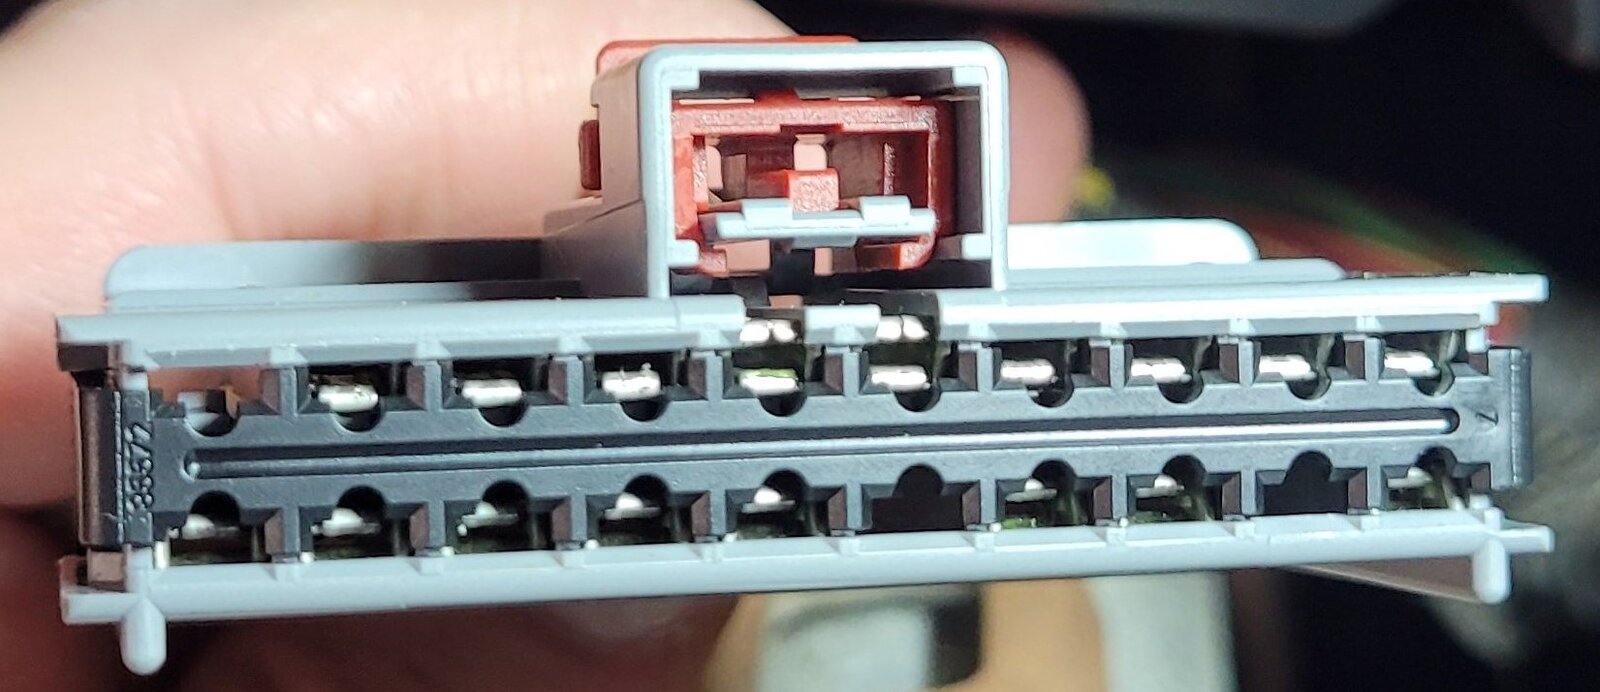 Repinned_New_Connector.jpg